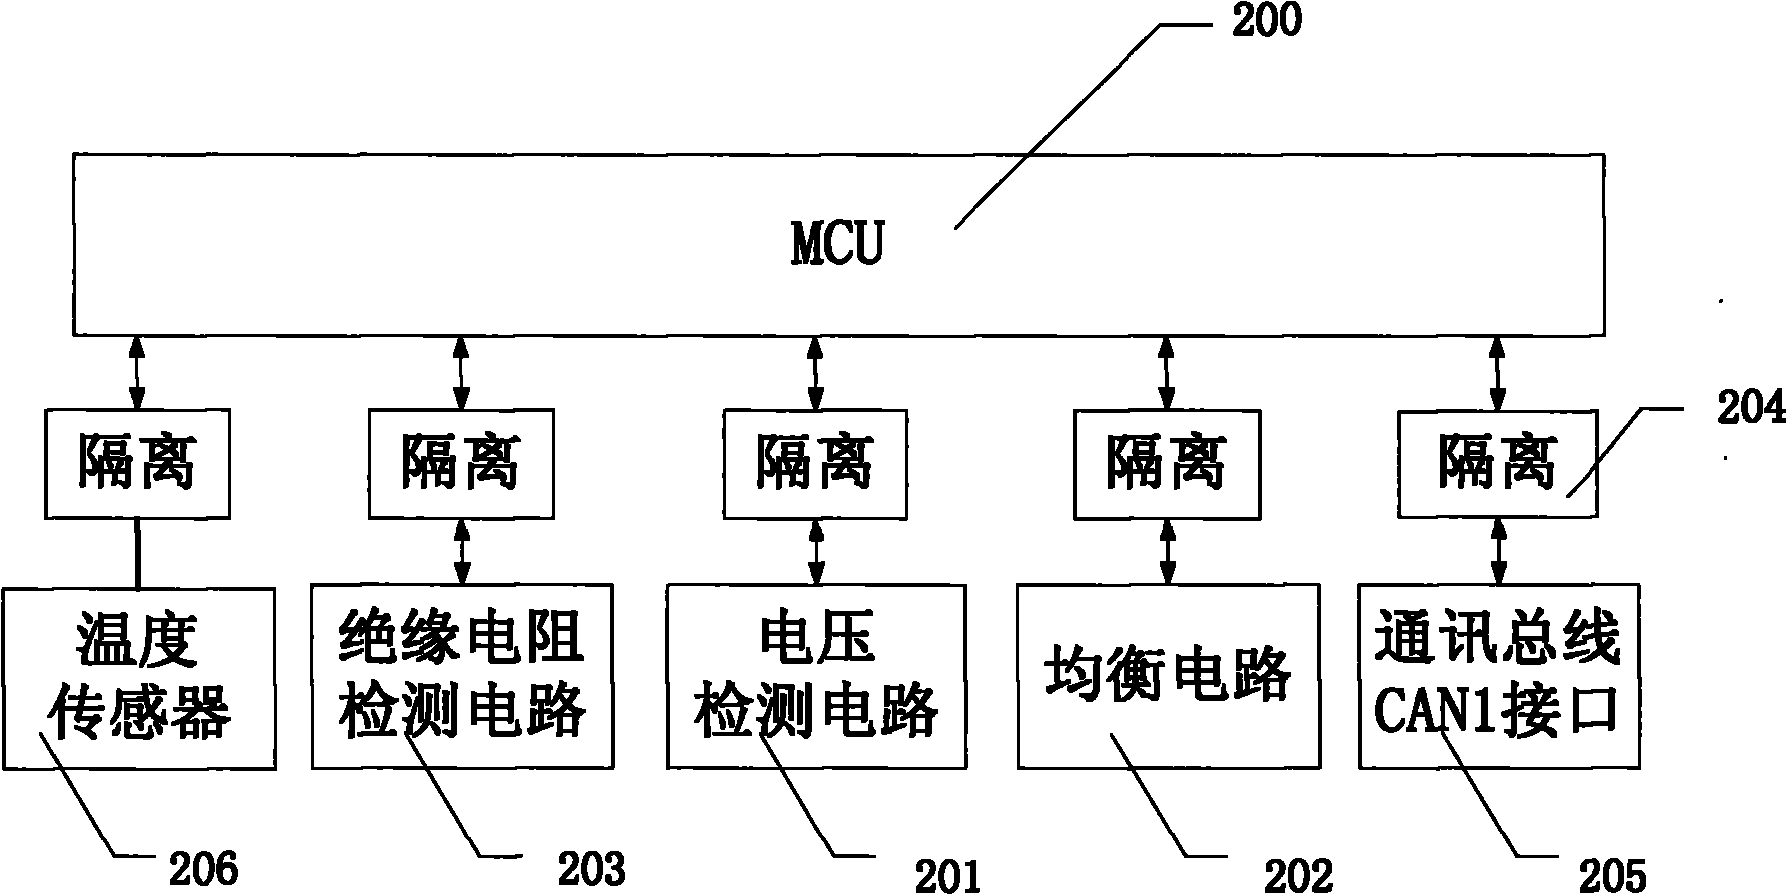 Special power battery management system for electric vehicle and implementation method thereof